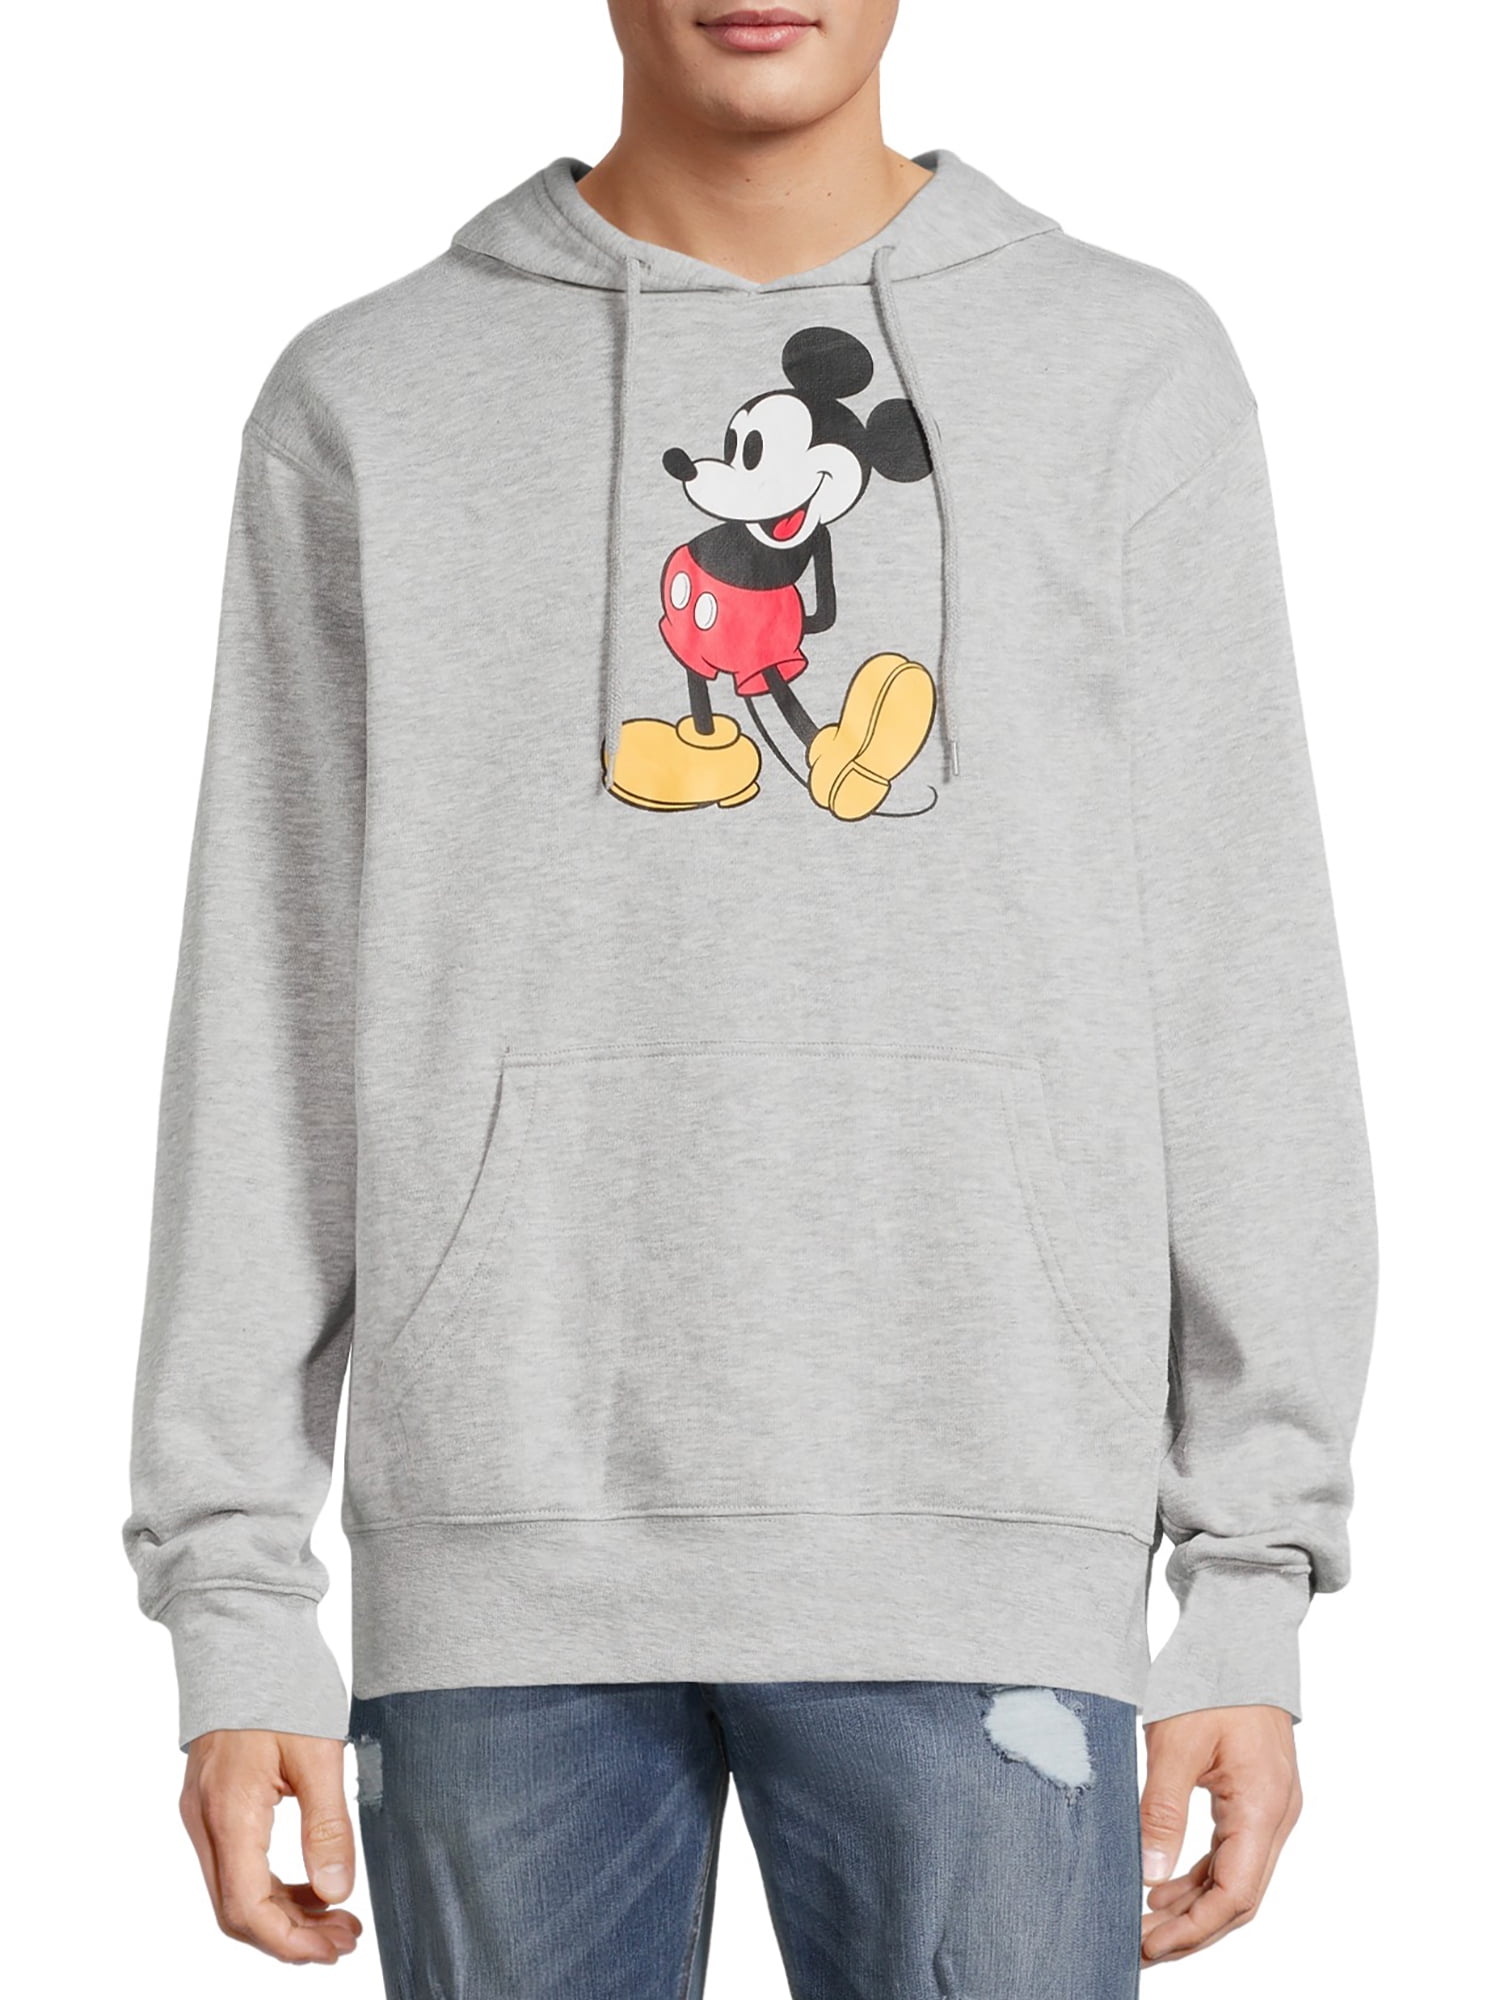 Mickey Mouse Chicago Cubs Disney Game Day Shirt, hoodie, sweater